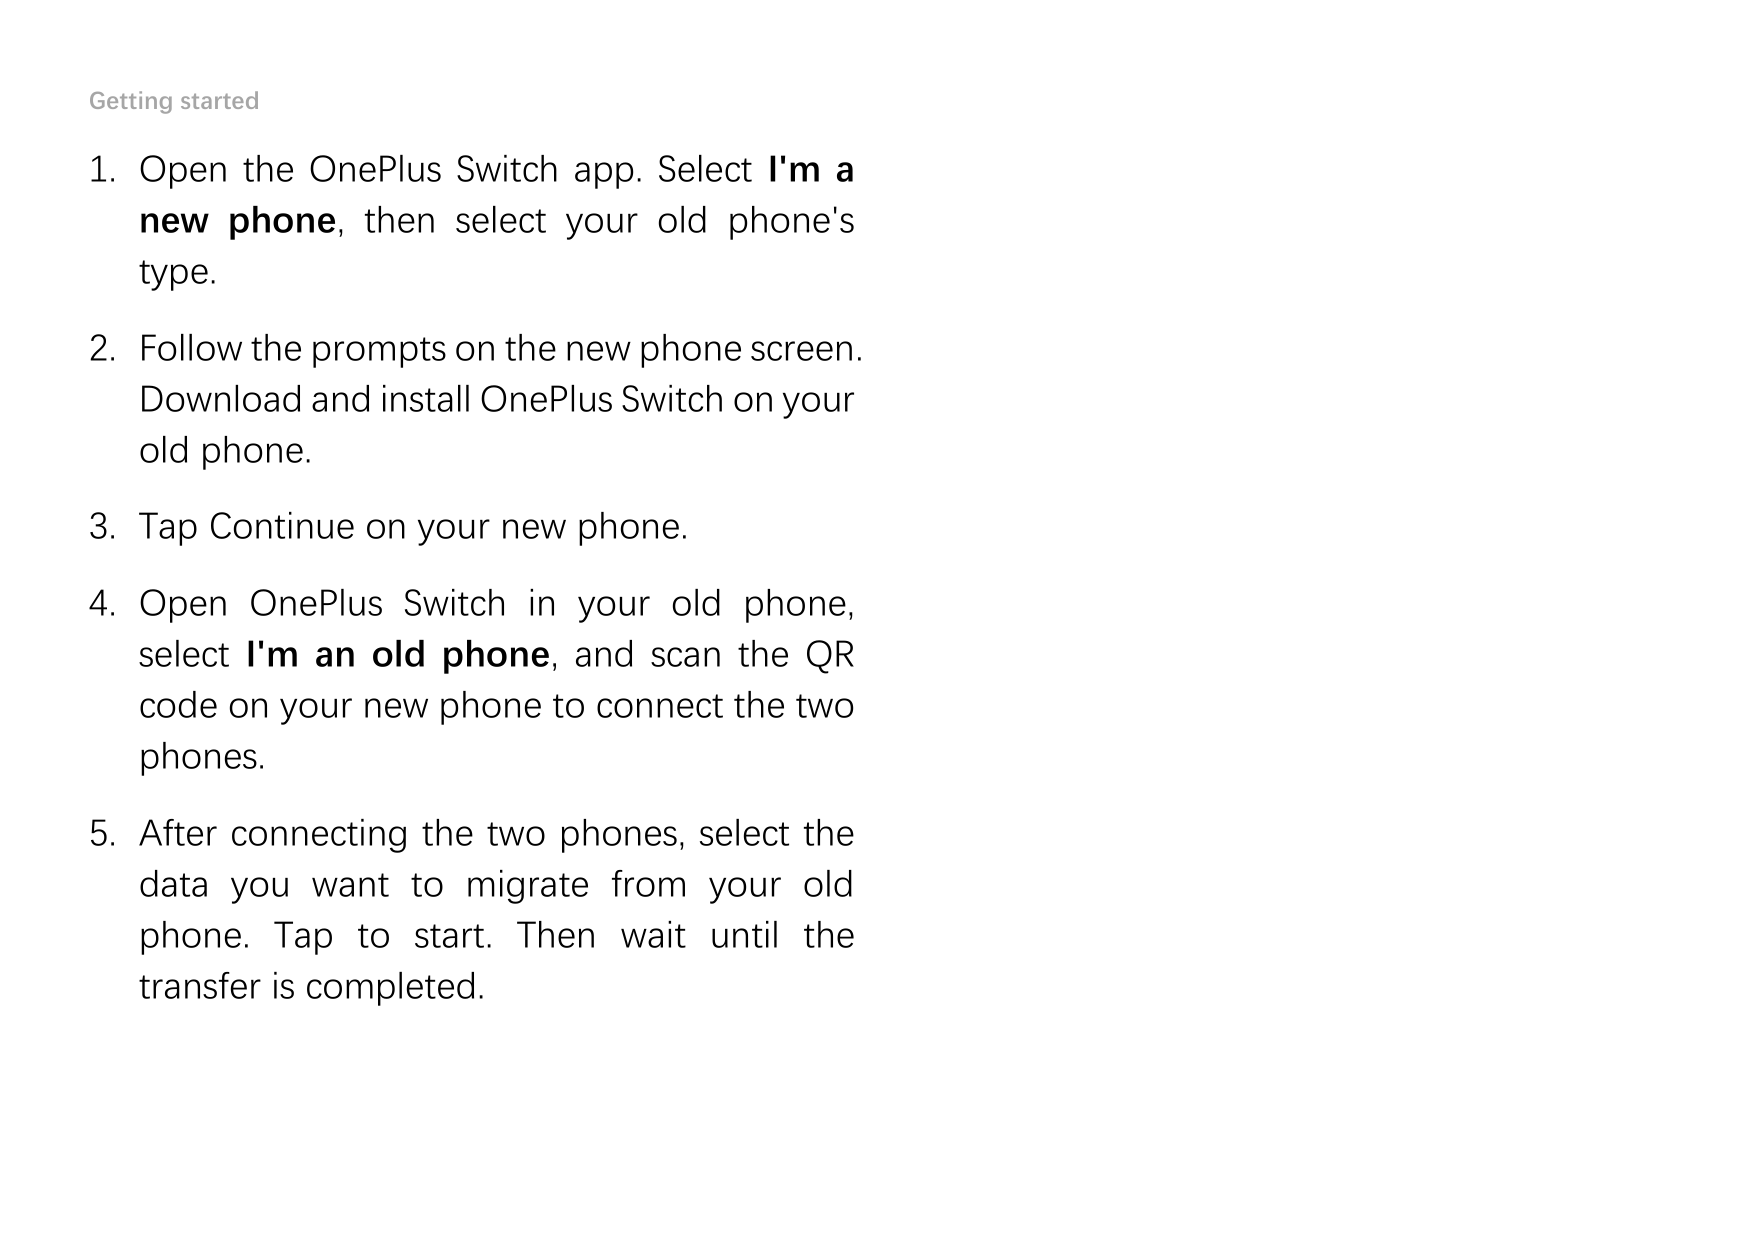 Getting started1. Open the OnePlus Switch app. Select I'm anew phone, then select your old phone'stype.2. Follow the prompts on 